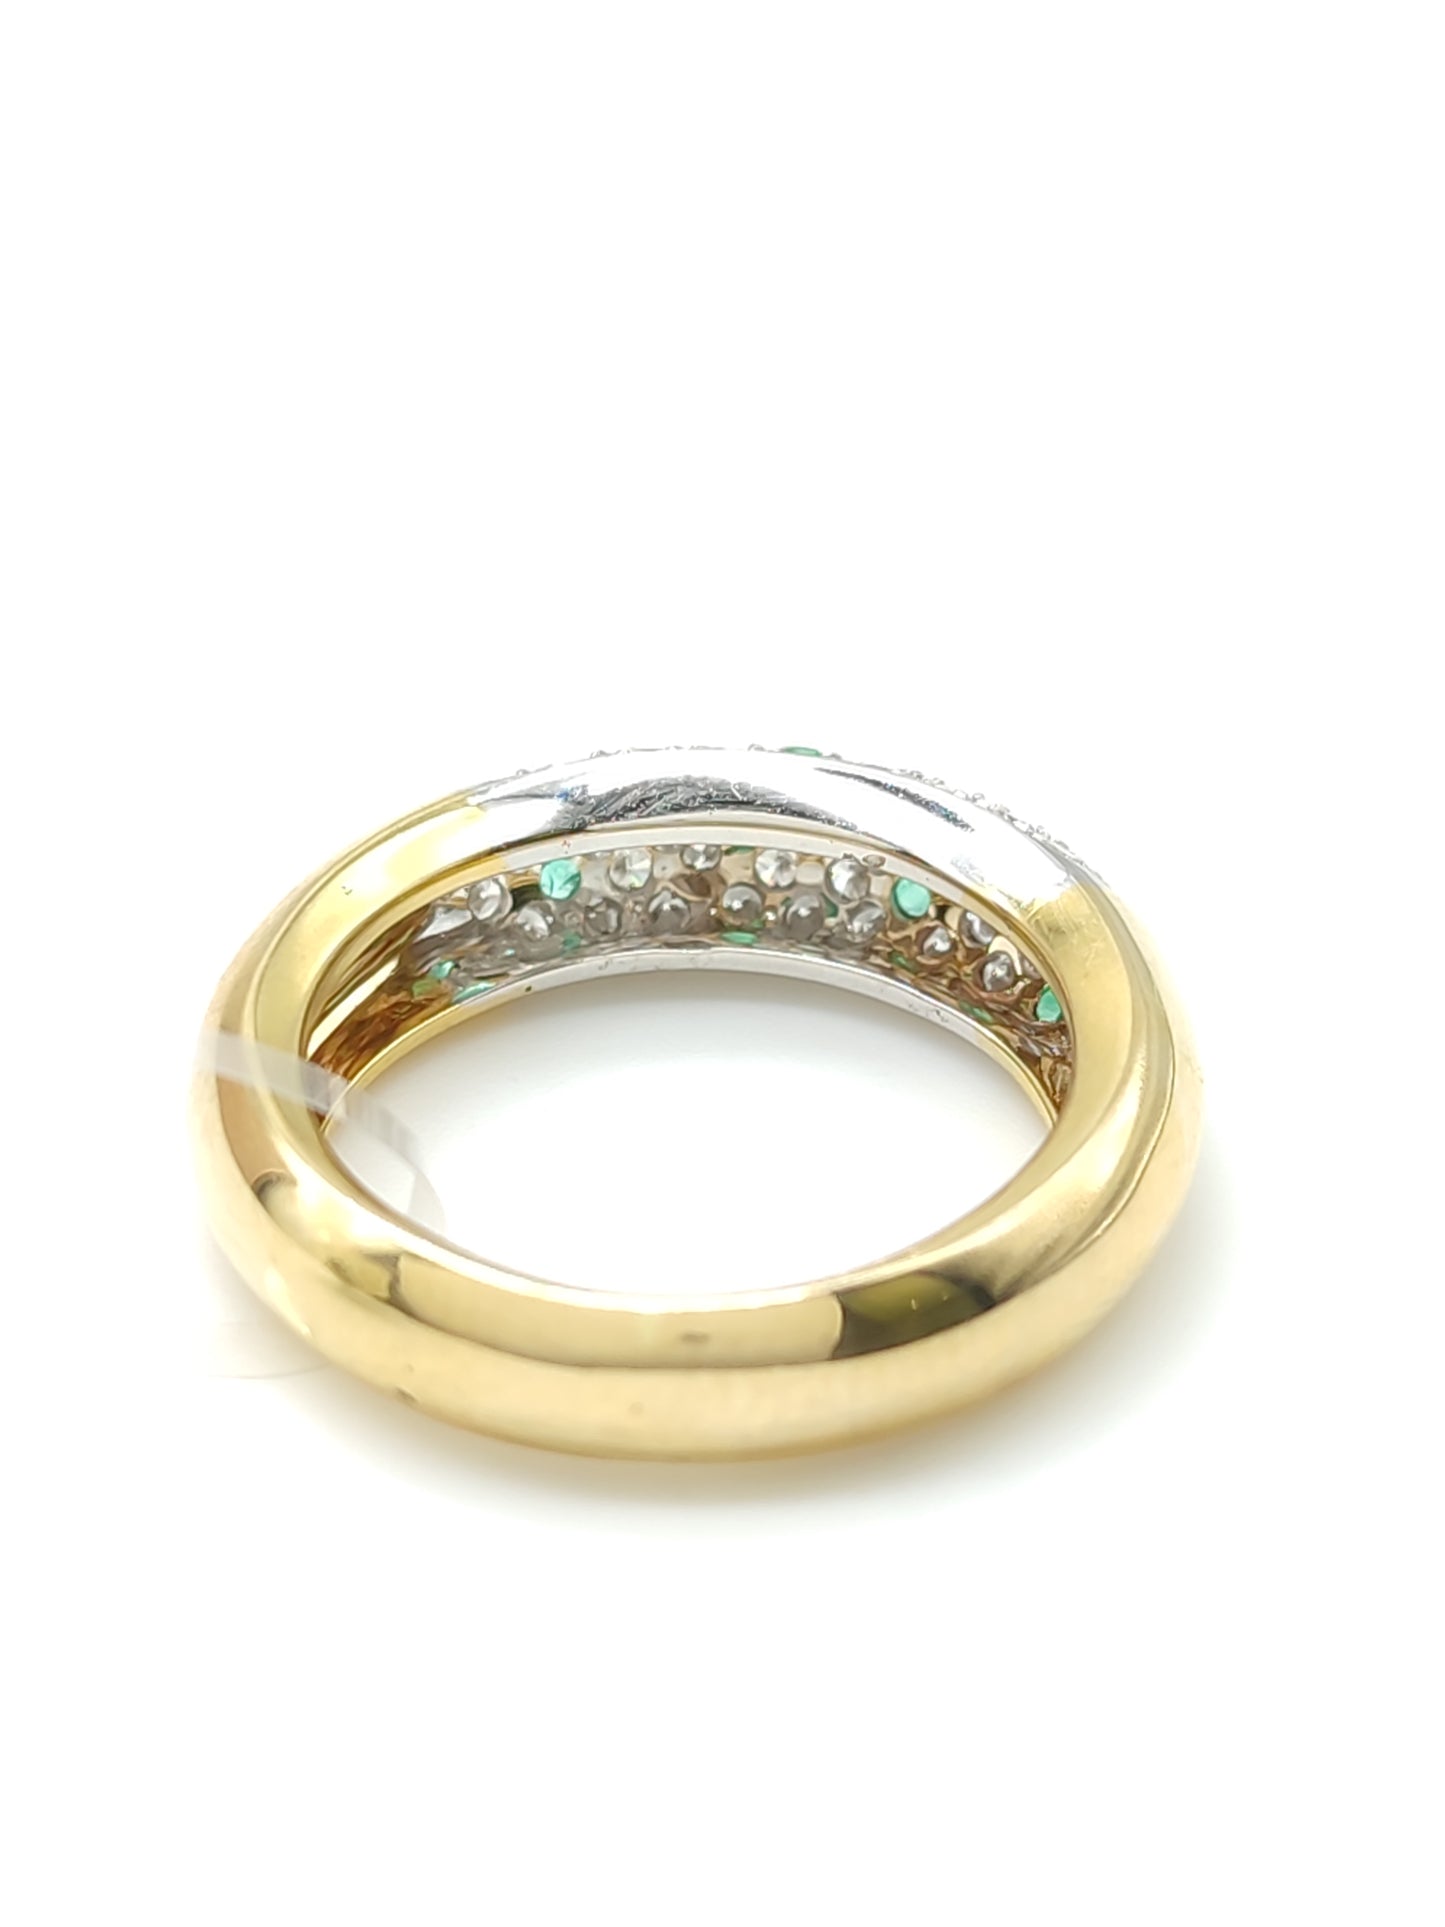 Gold ring with emeralds and diamonds